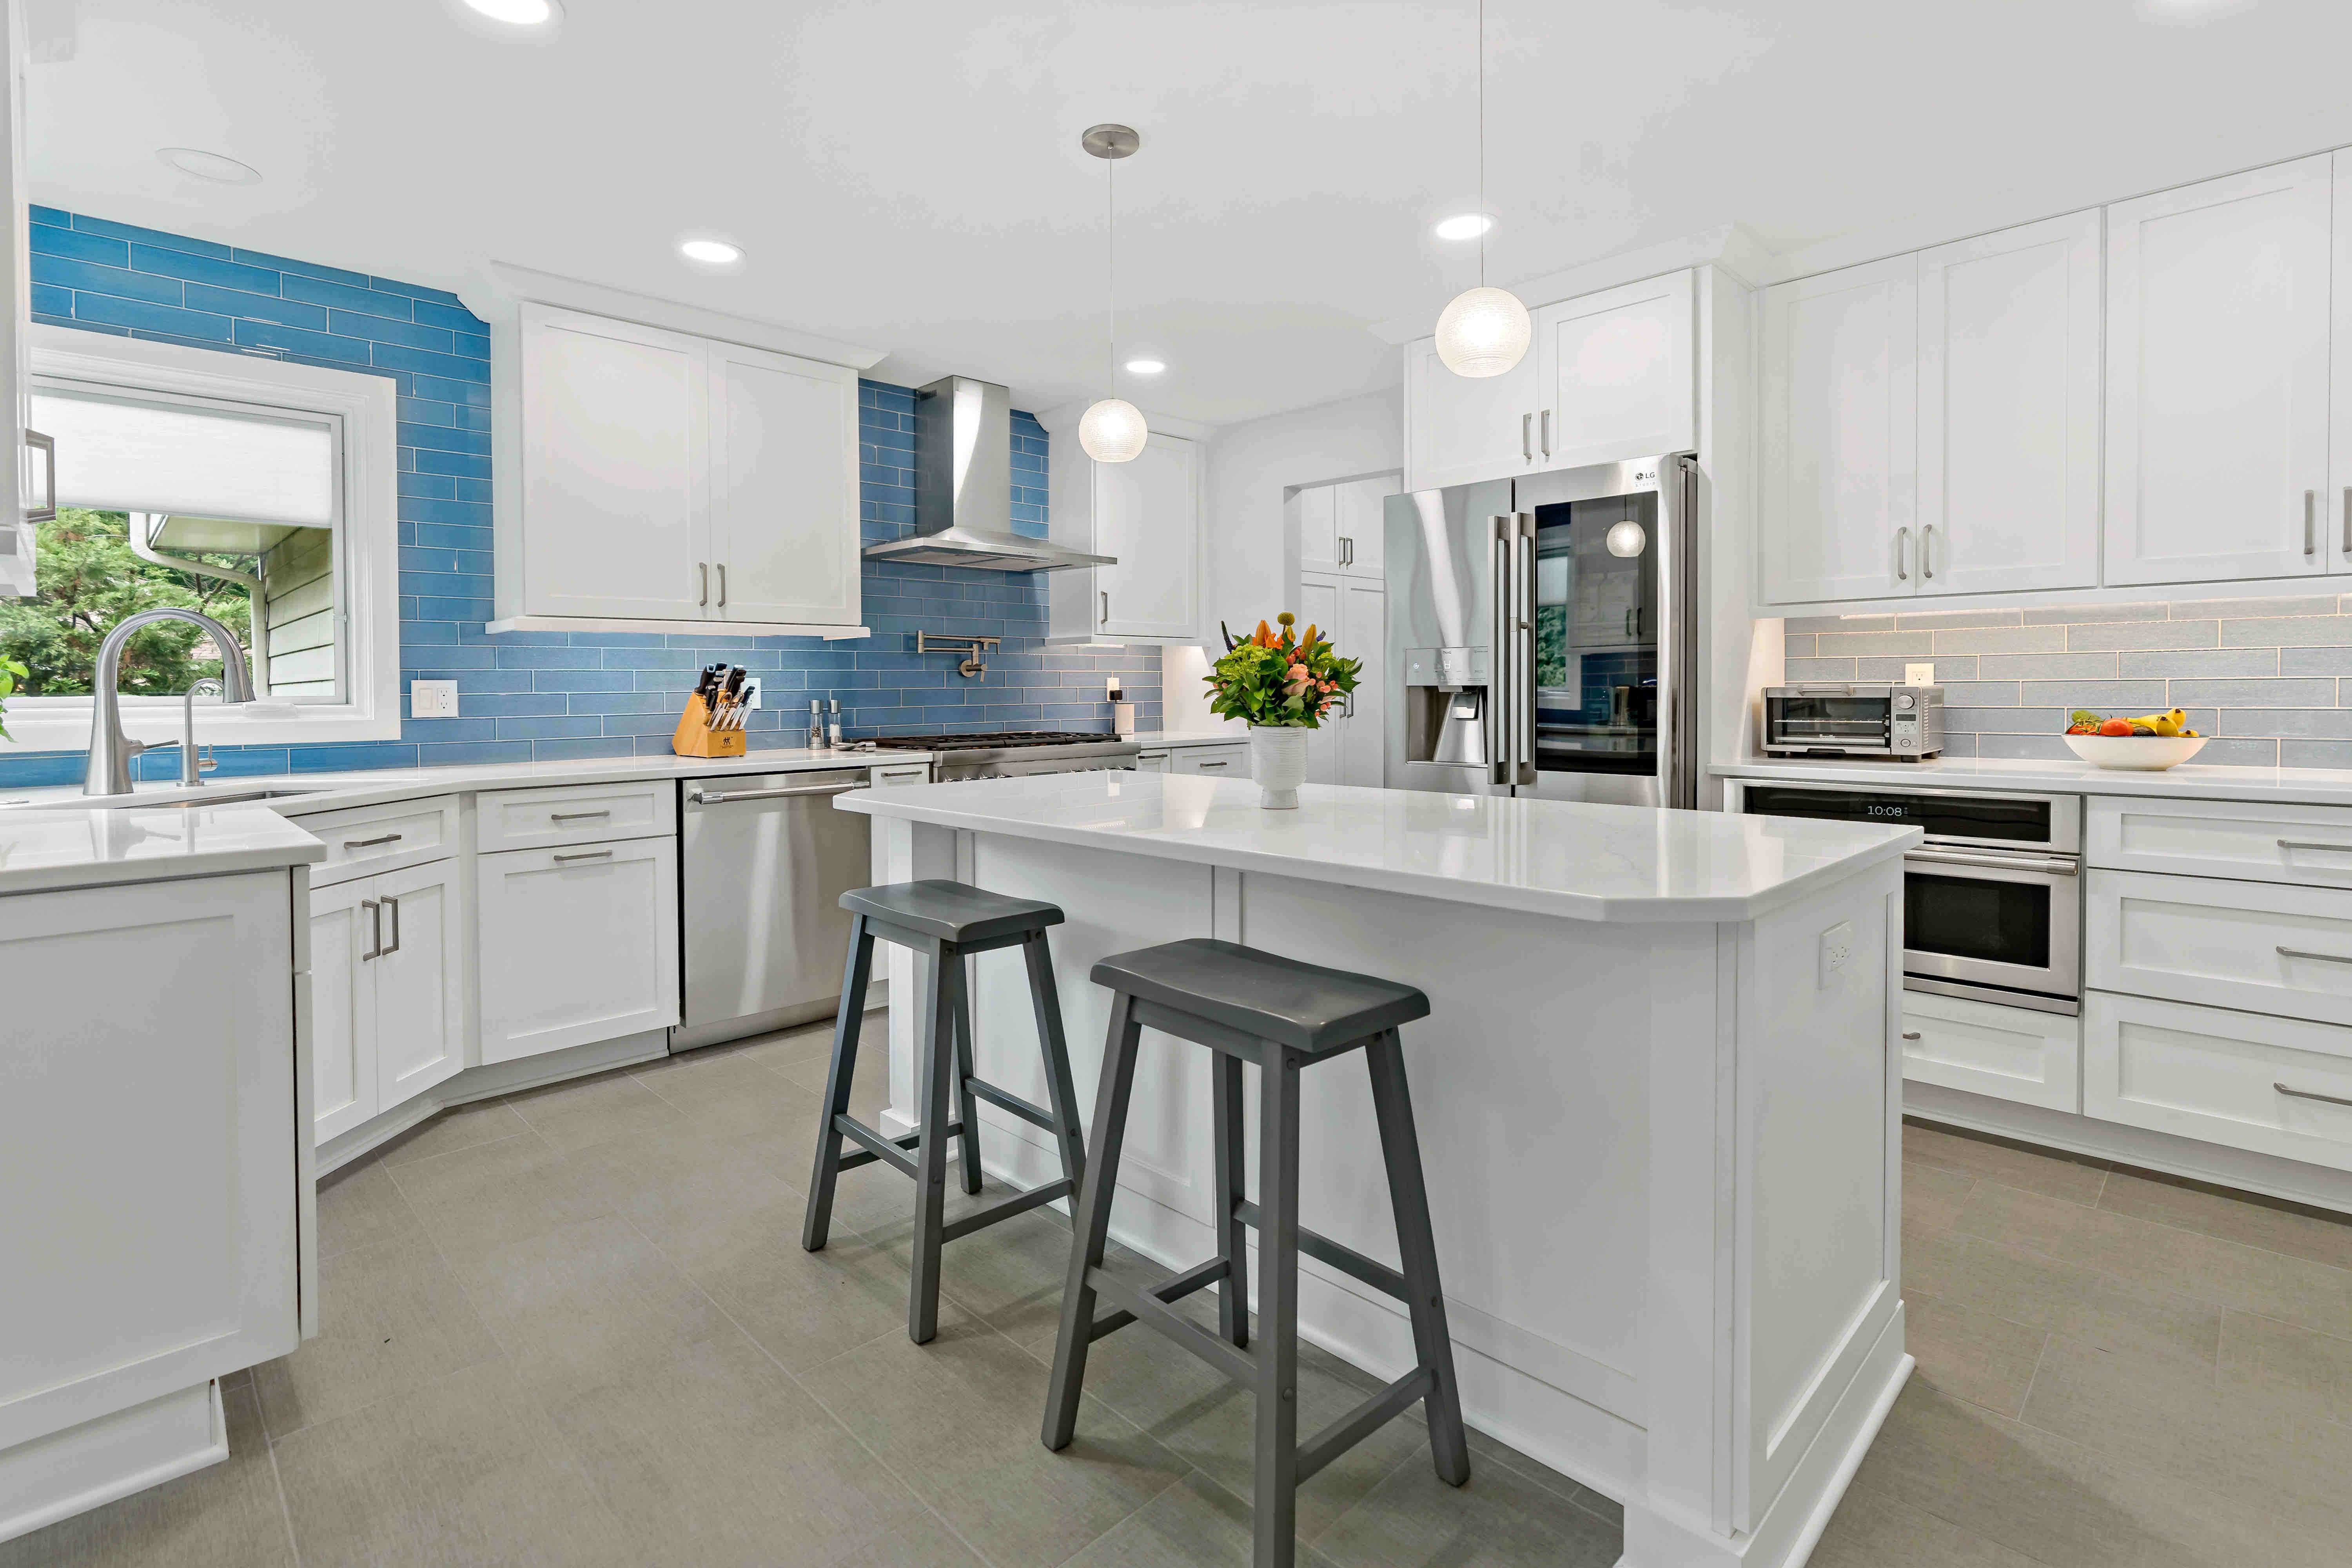 Oakton Home is Transformed with a Beautiful Remodeled Kitchen